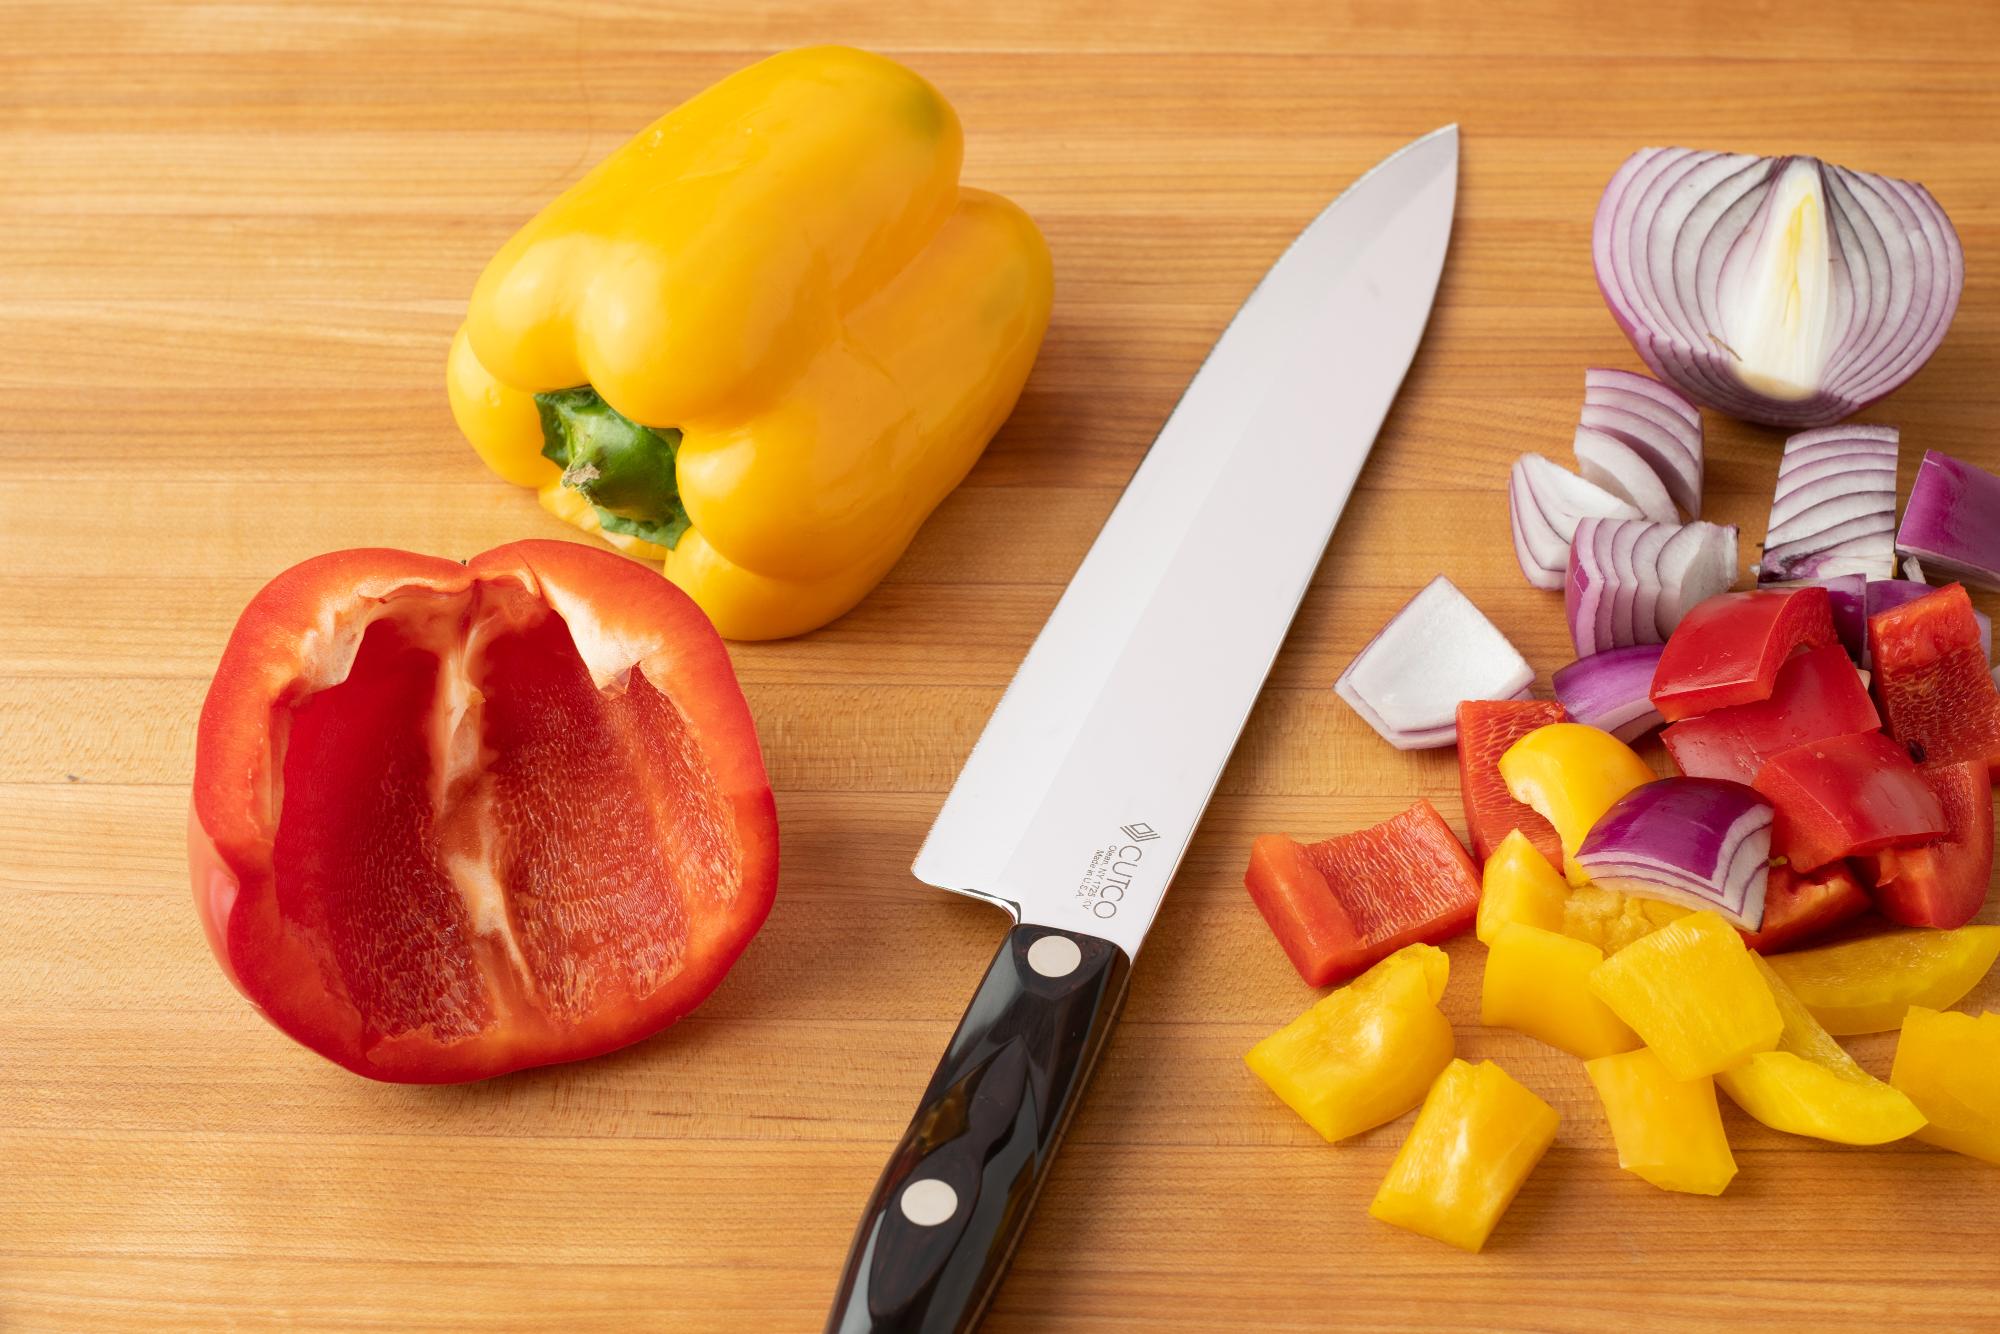 Chop the peppers and onions with a Petite Chef.